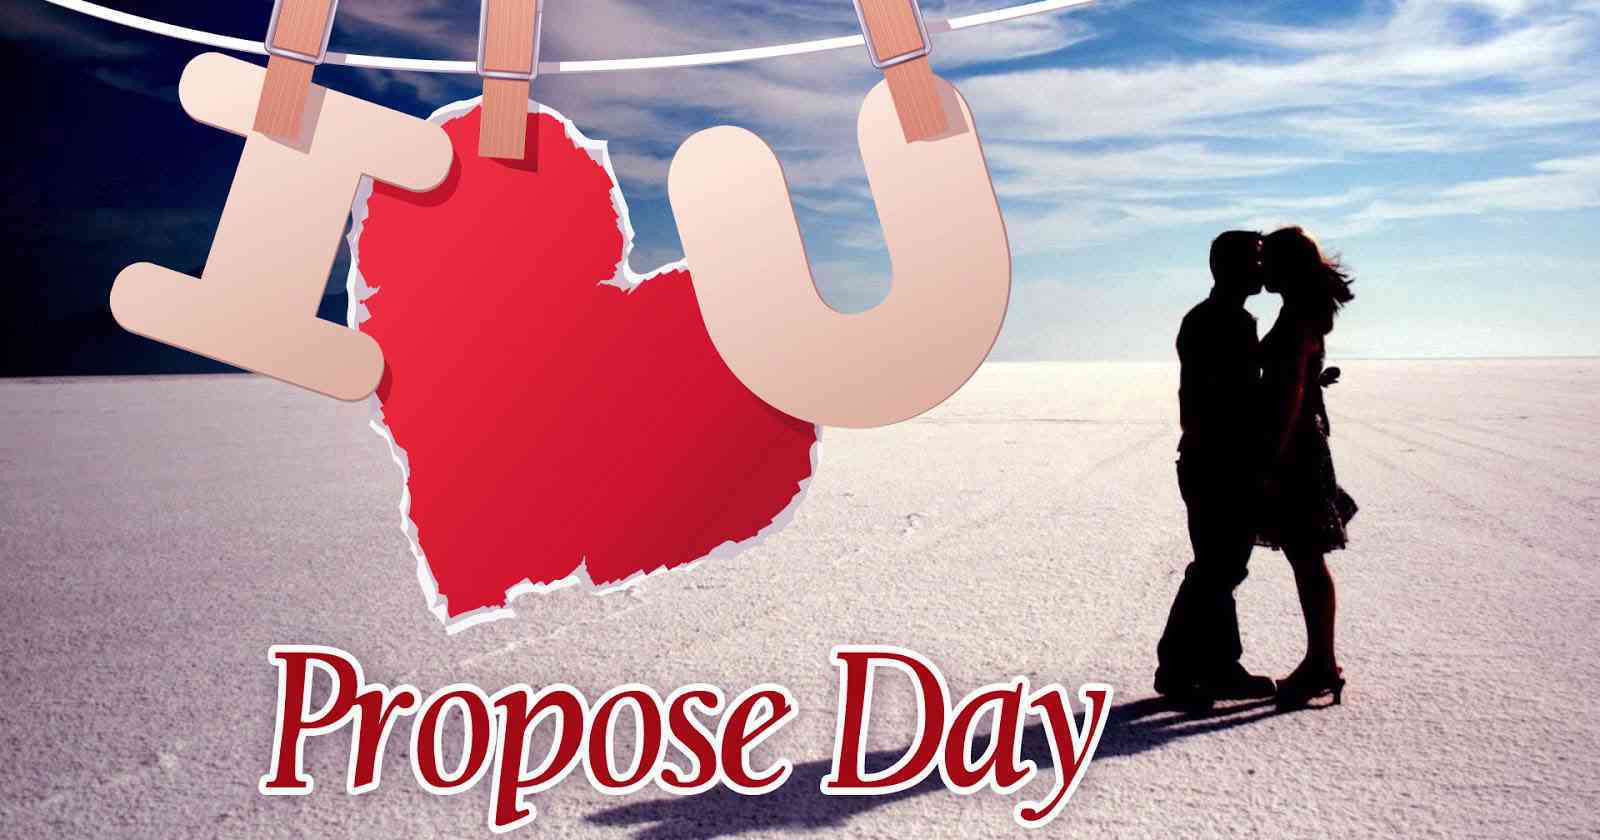 I love you propose day wishes